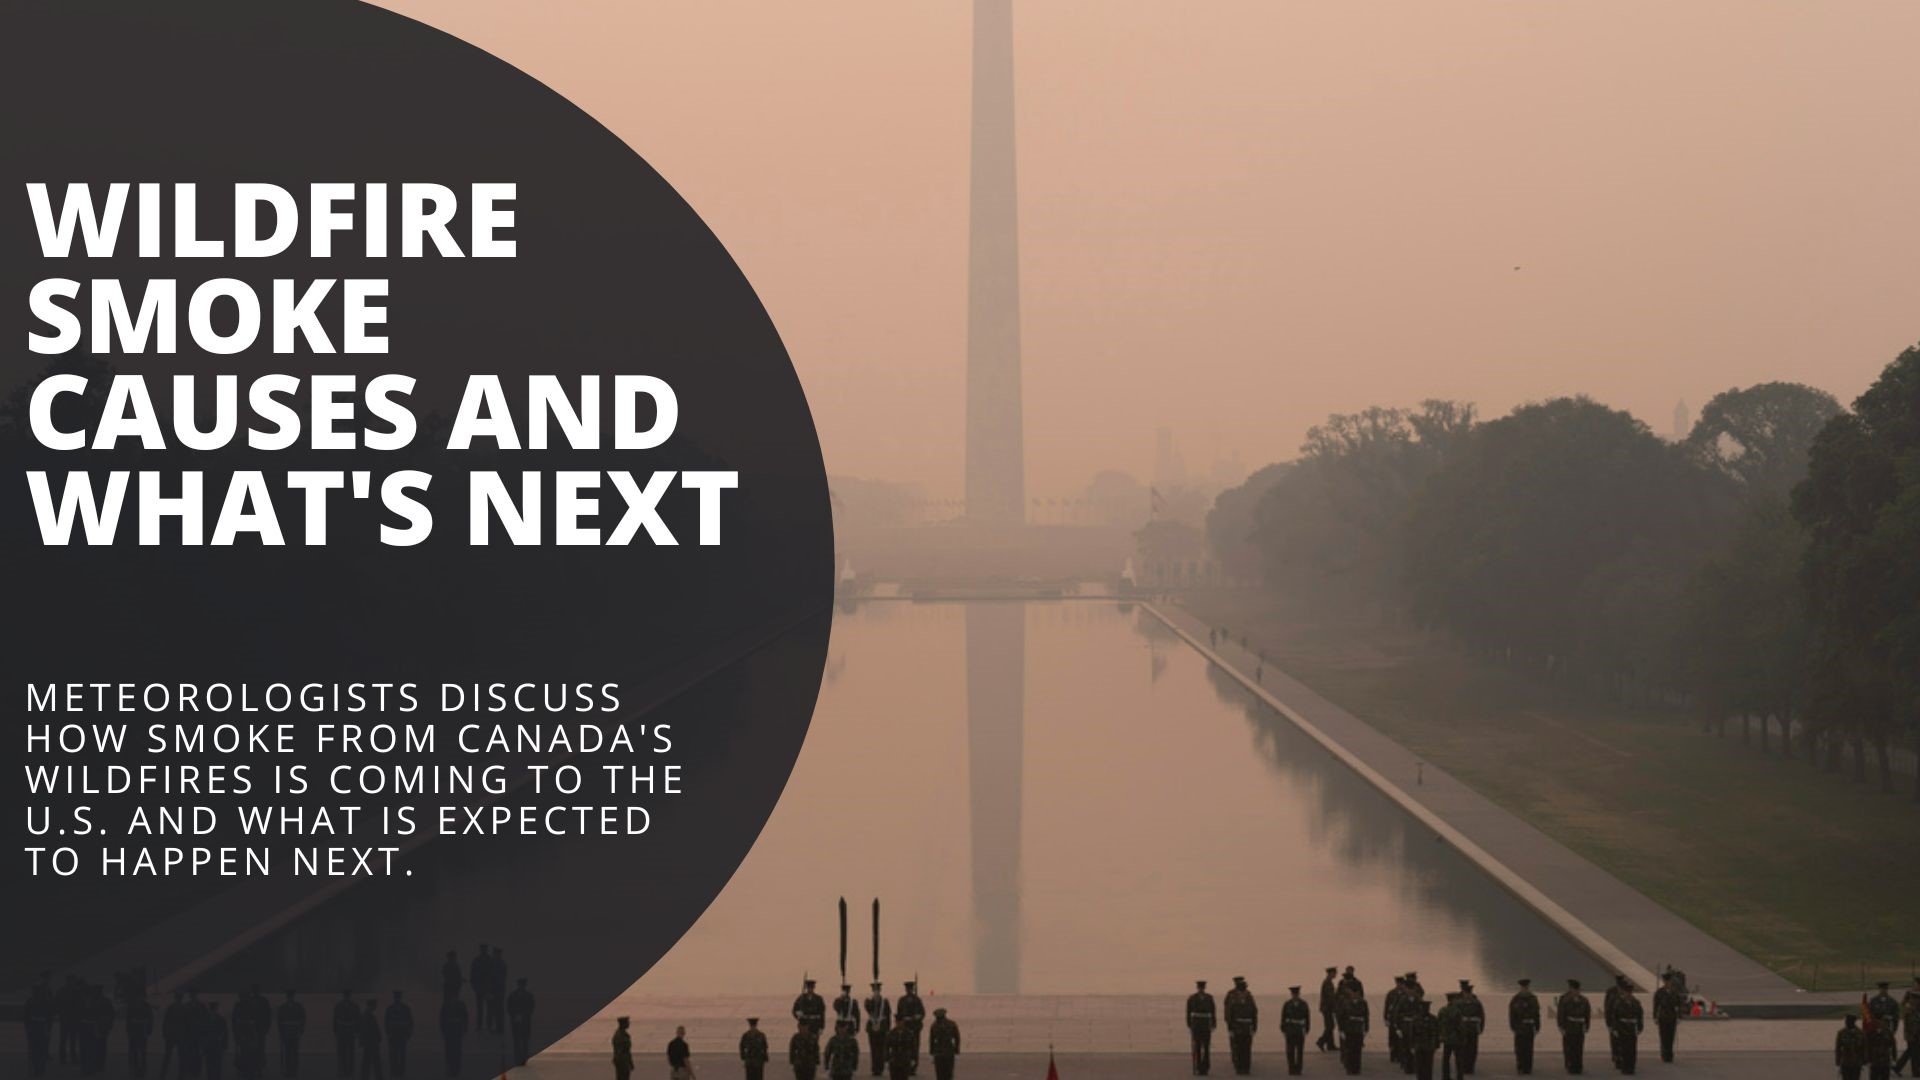 Meteorologists discuss the wildfire smoke creating air quality concerns in the U.S. and what's to come in the days ahead. Plus more on how they track the smoke.